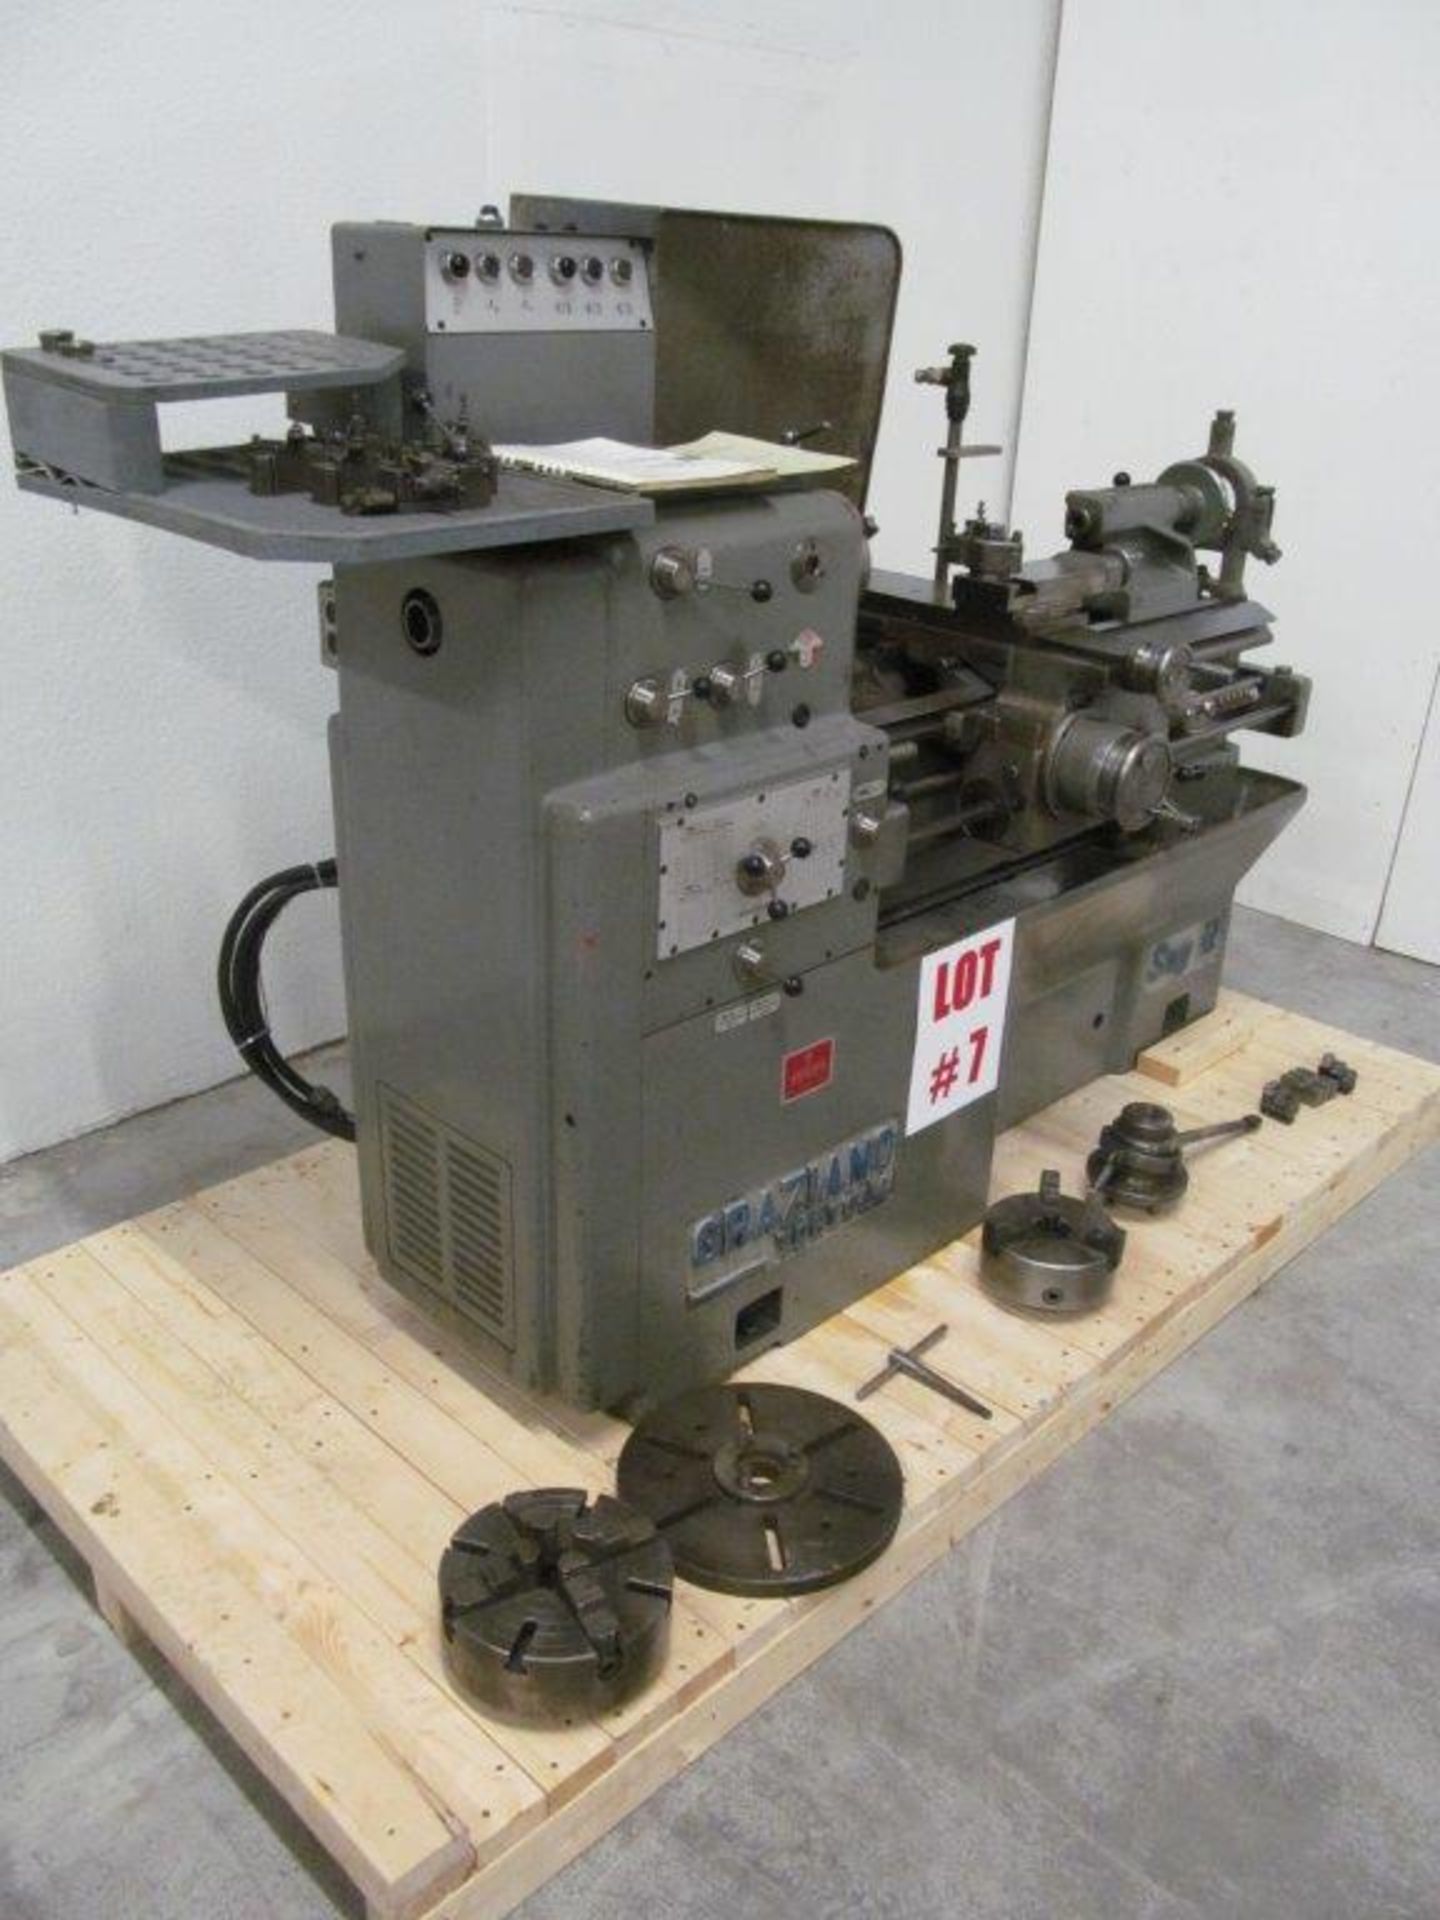 GRAZIANO ENGINE LATHE MODEL SAG 12, 14-1/2" SWING X 30" CENTERS, C/W ACCOMPANYING ACCESSORIES, - Image 2 of 8